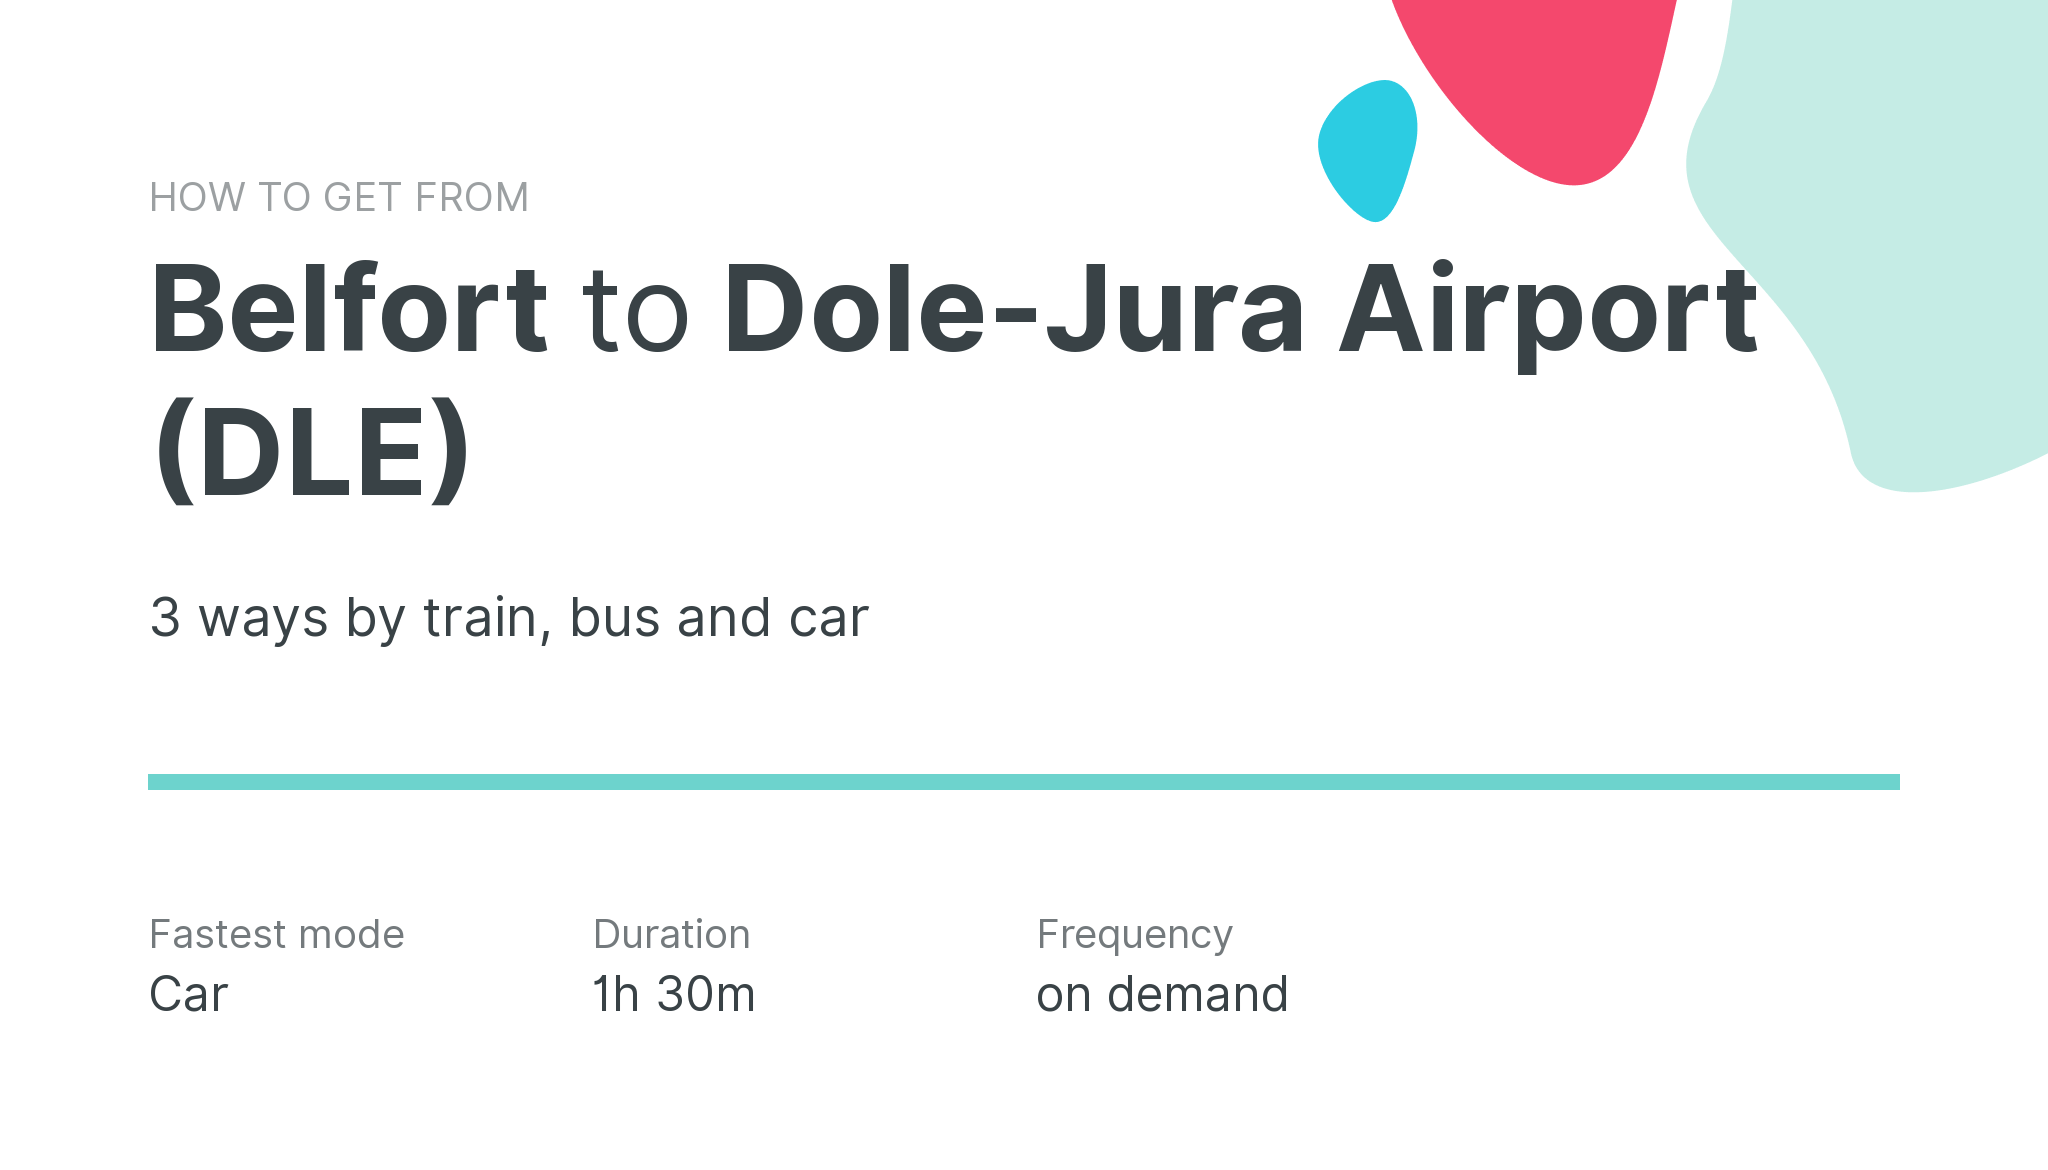 How do I get from Belfort to Dole-Jura Airport (DLE)